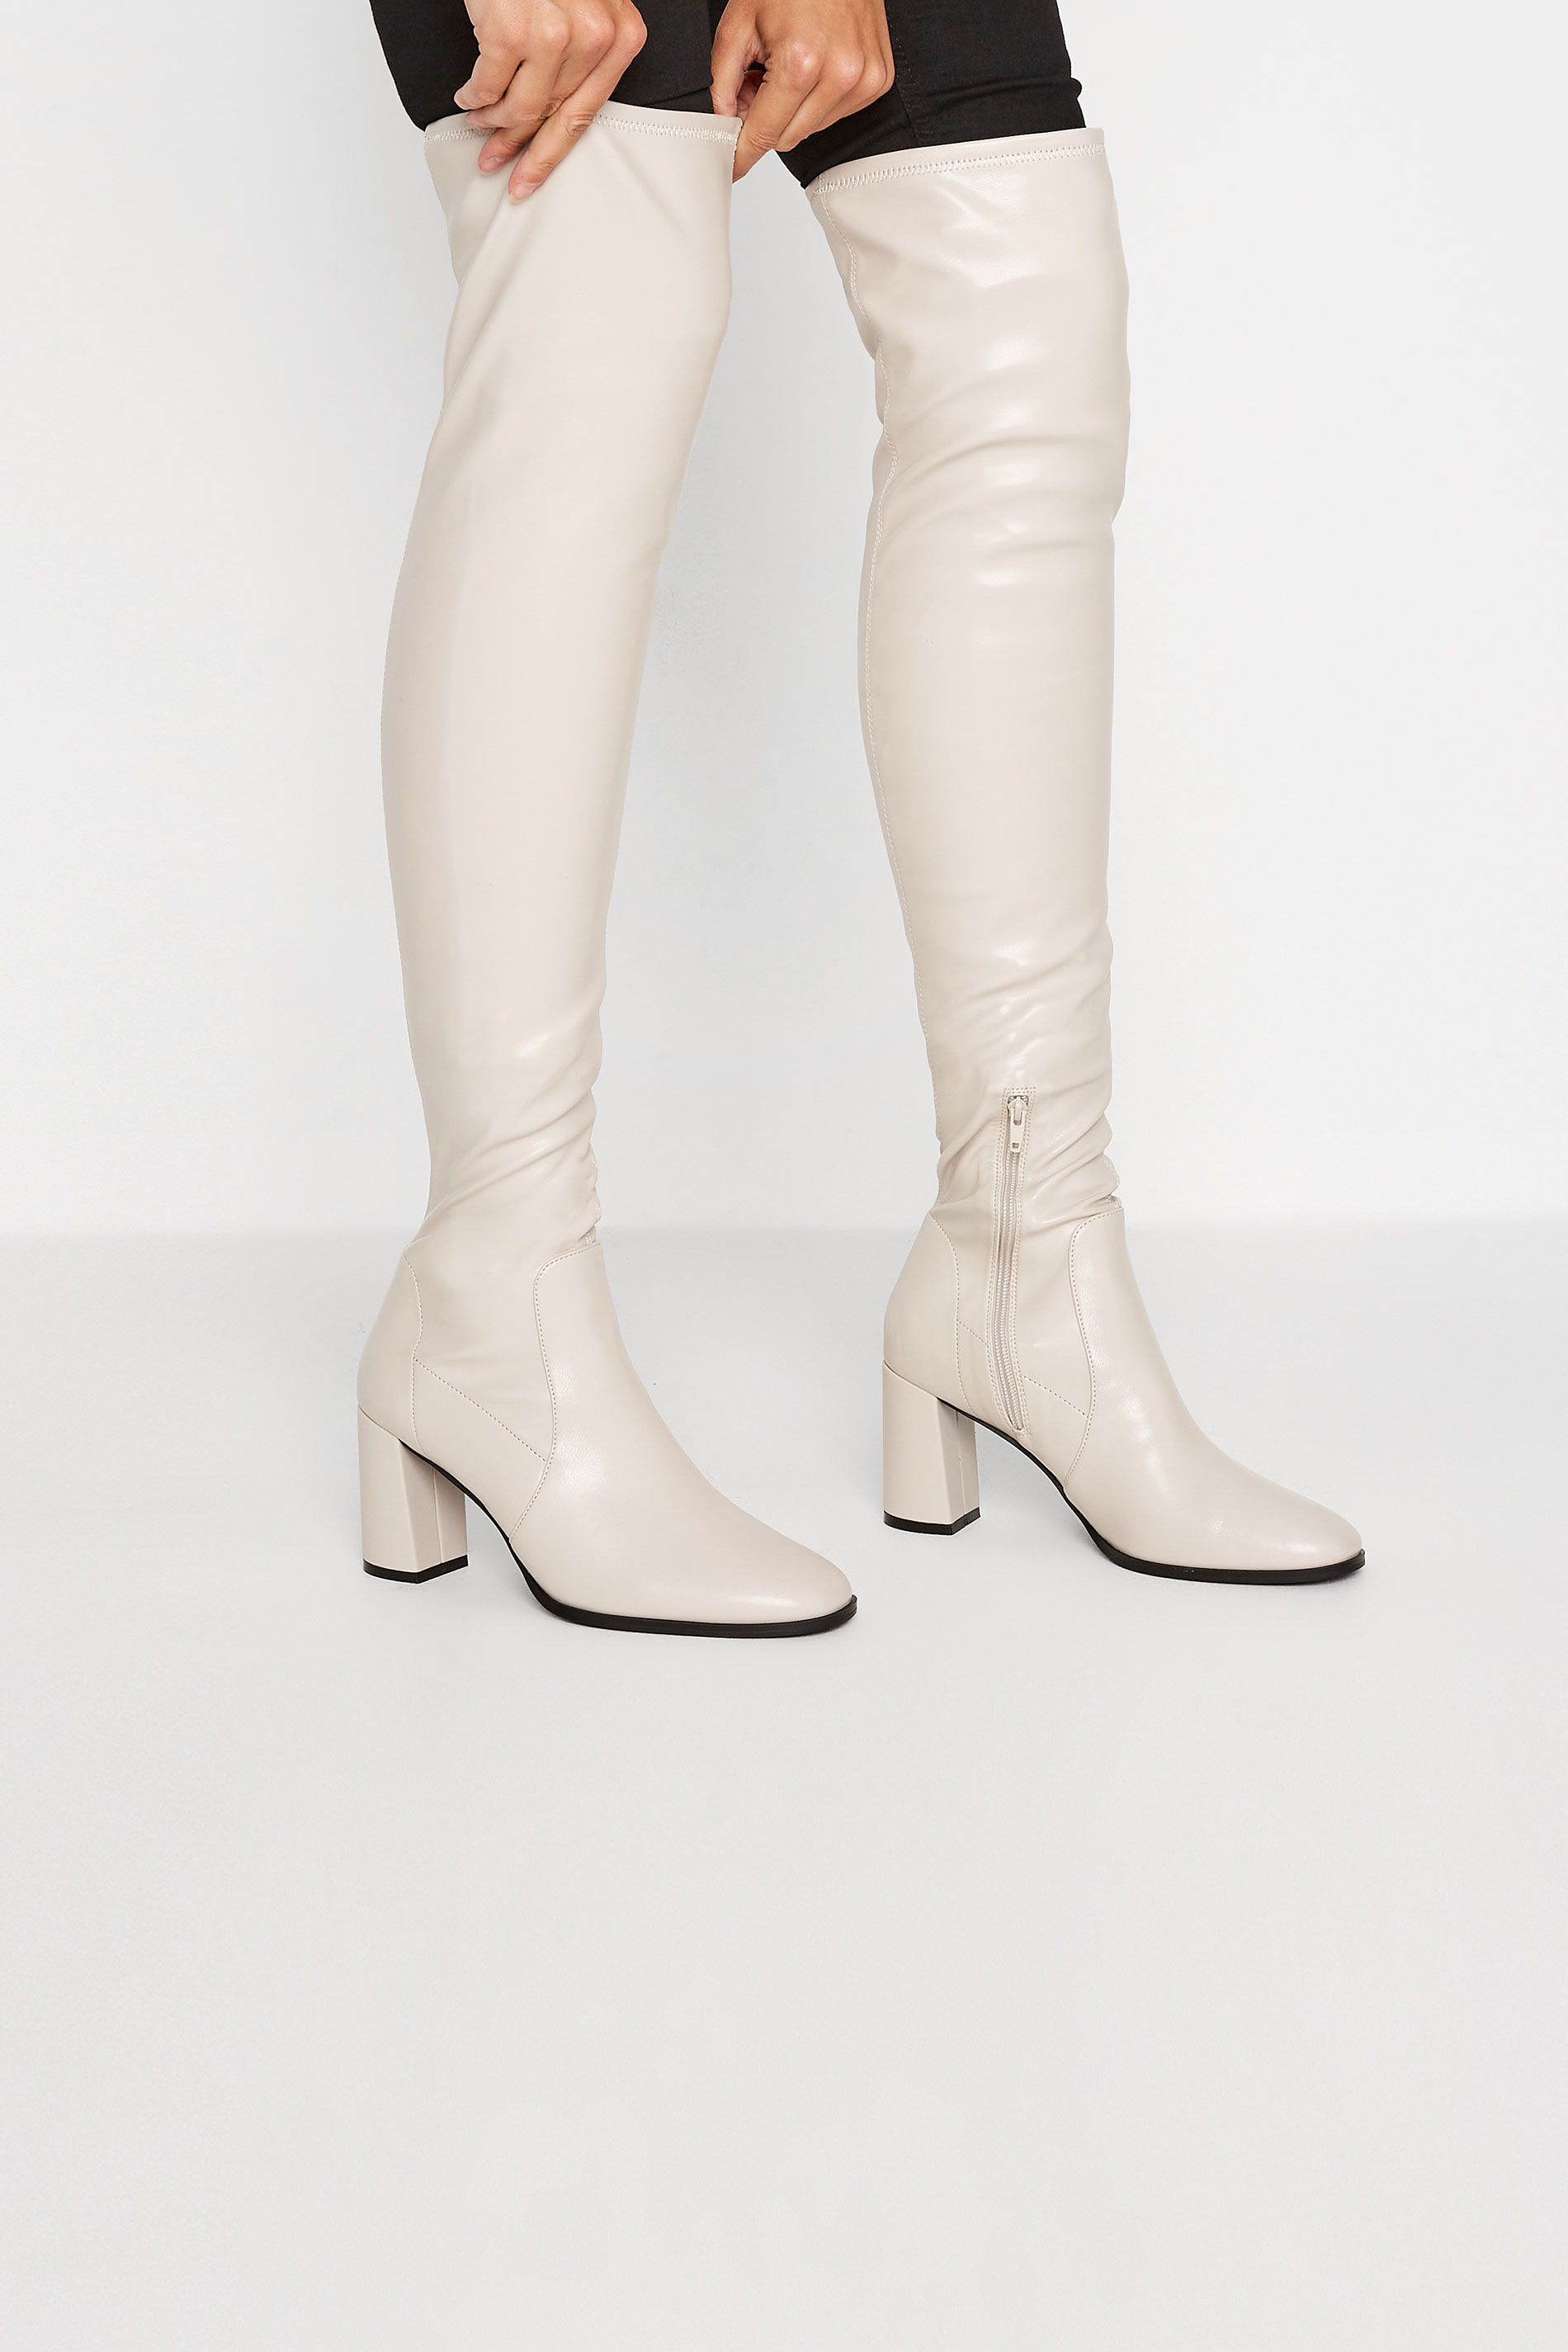 LTS Cream Heeled Over The Knee Boots In Standard Fit | Long Tall Sally 1